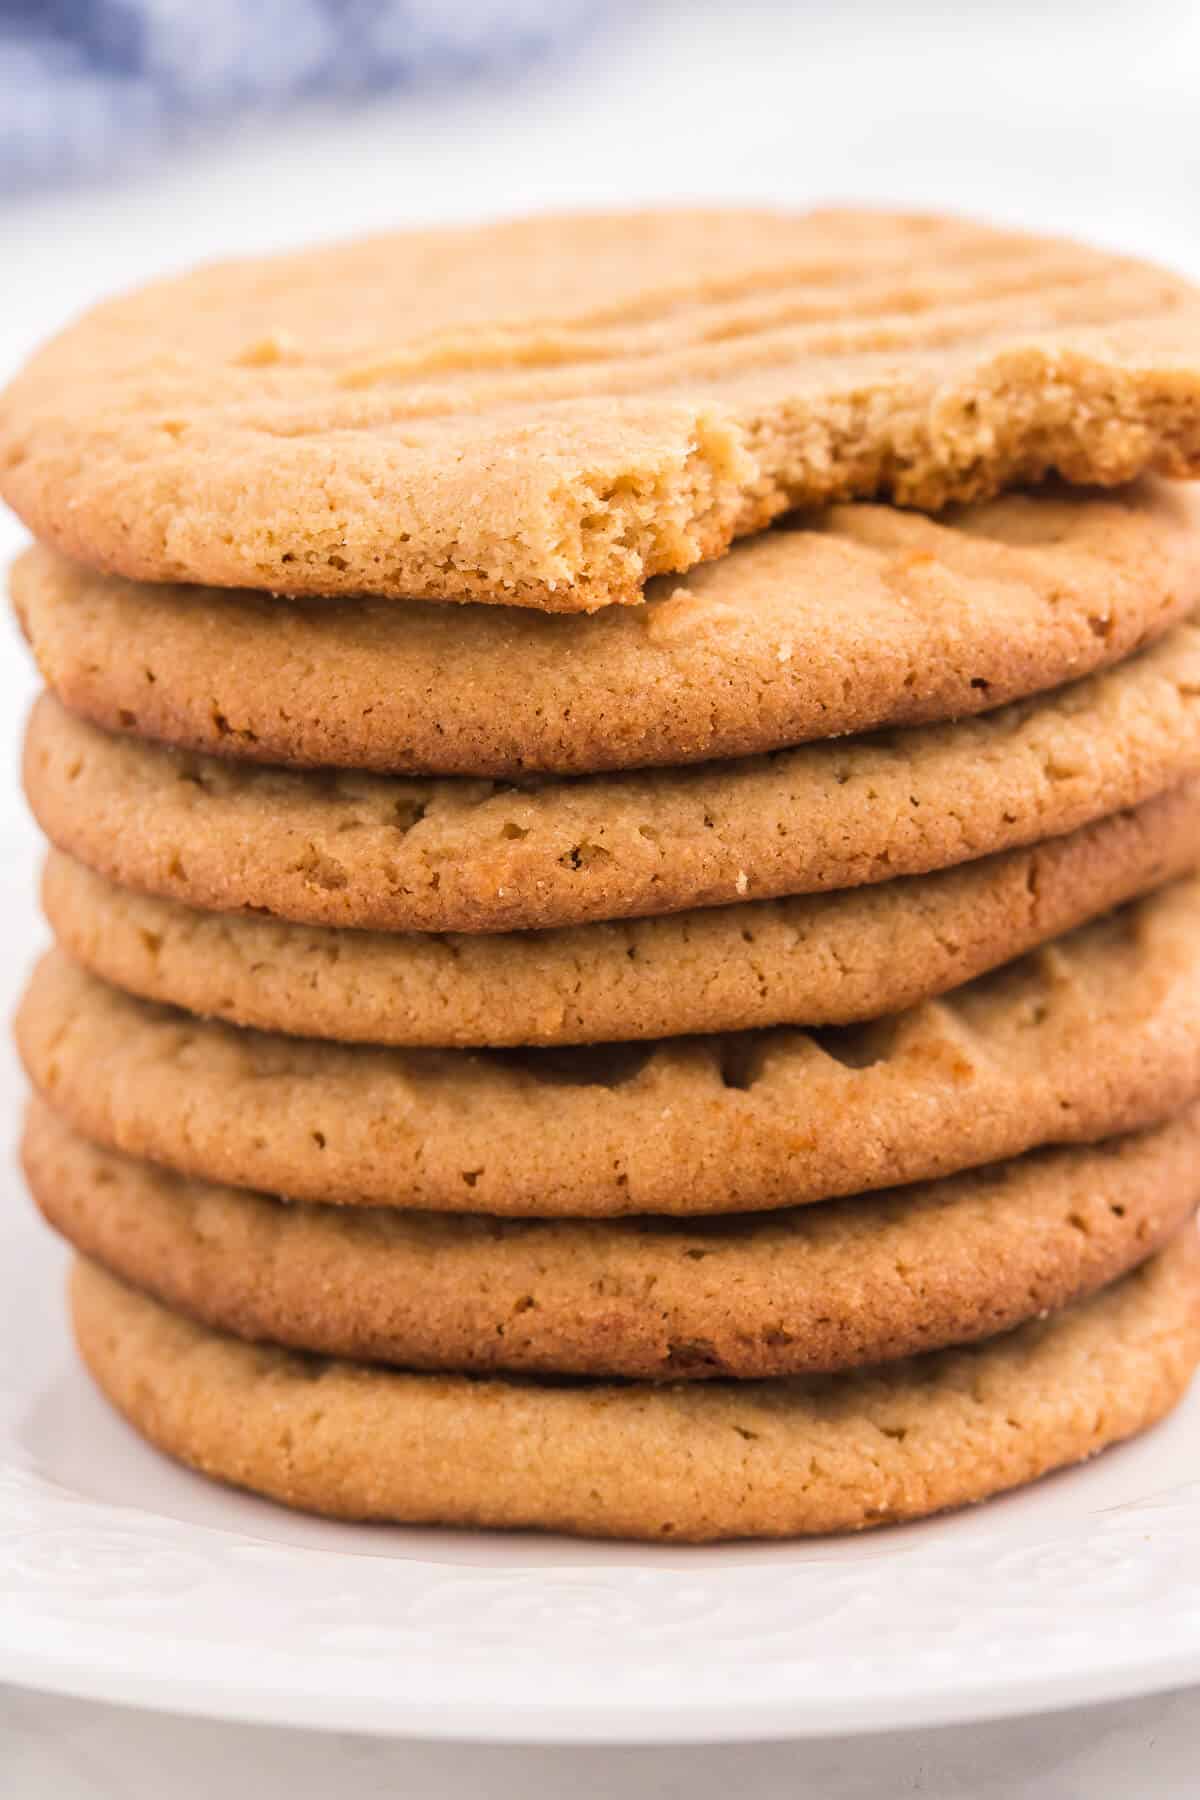 Peanut Butter Cookies - This classic homemade cookie recipe is quick and easy to make. Each bite is soft, chewy and full of peanut butter flavor that everyone knows and loves.